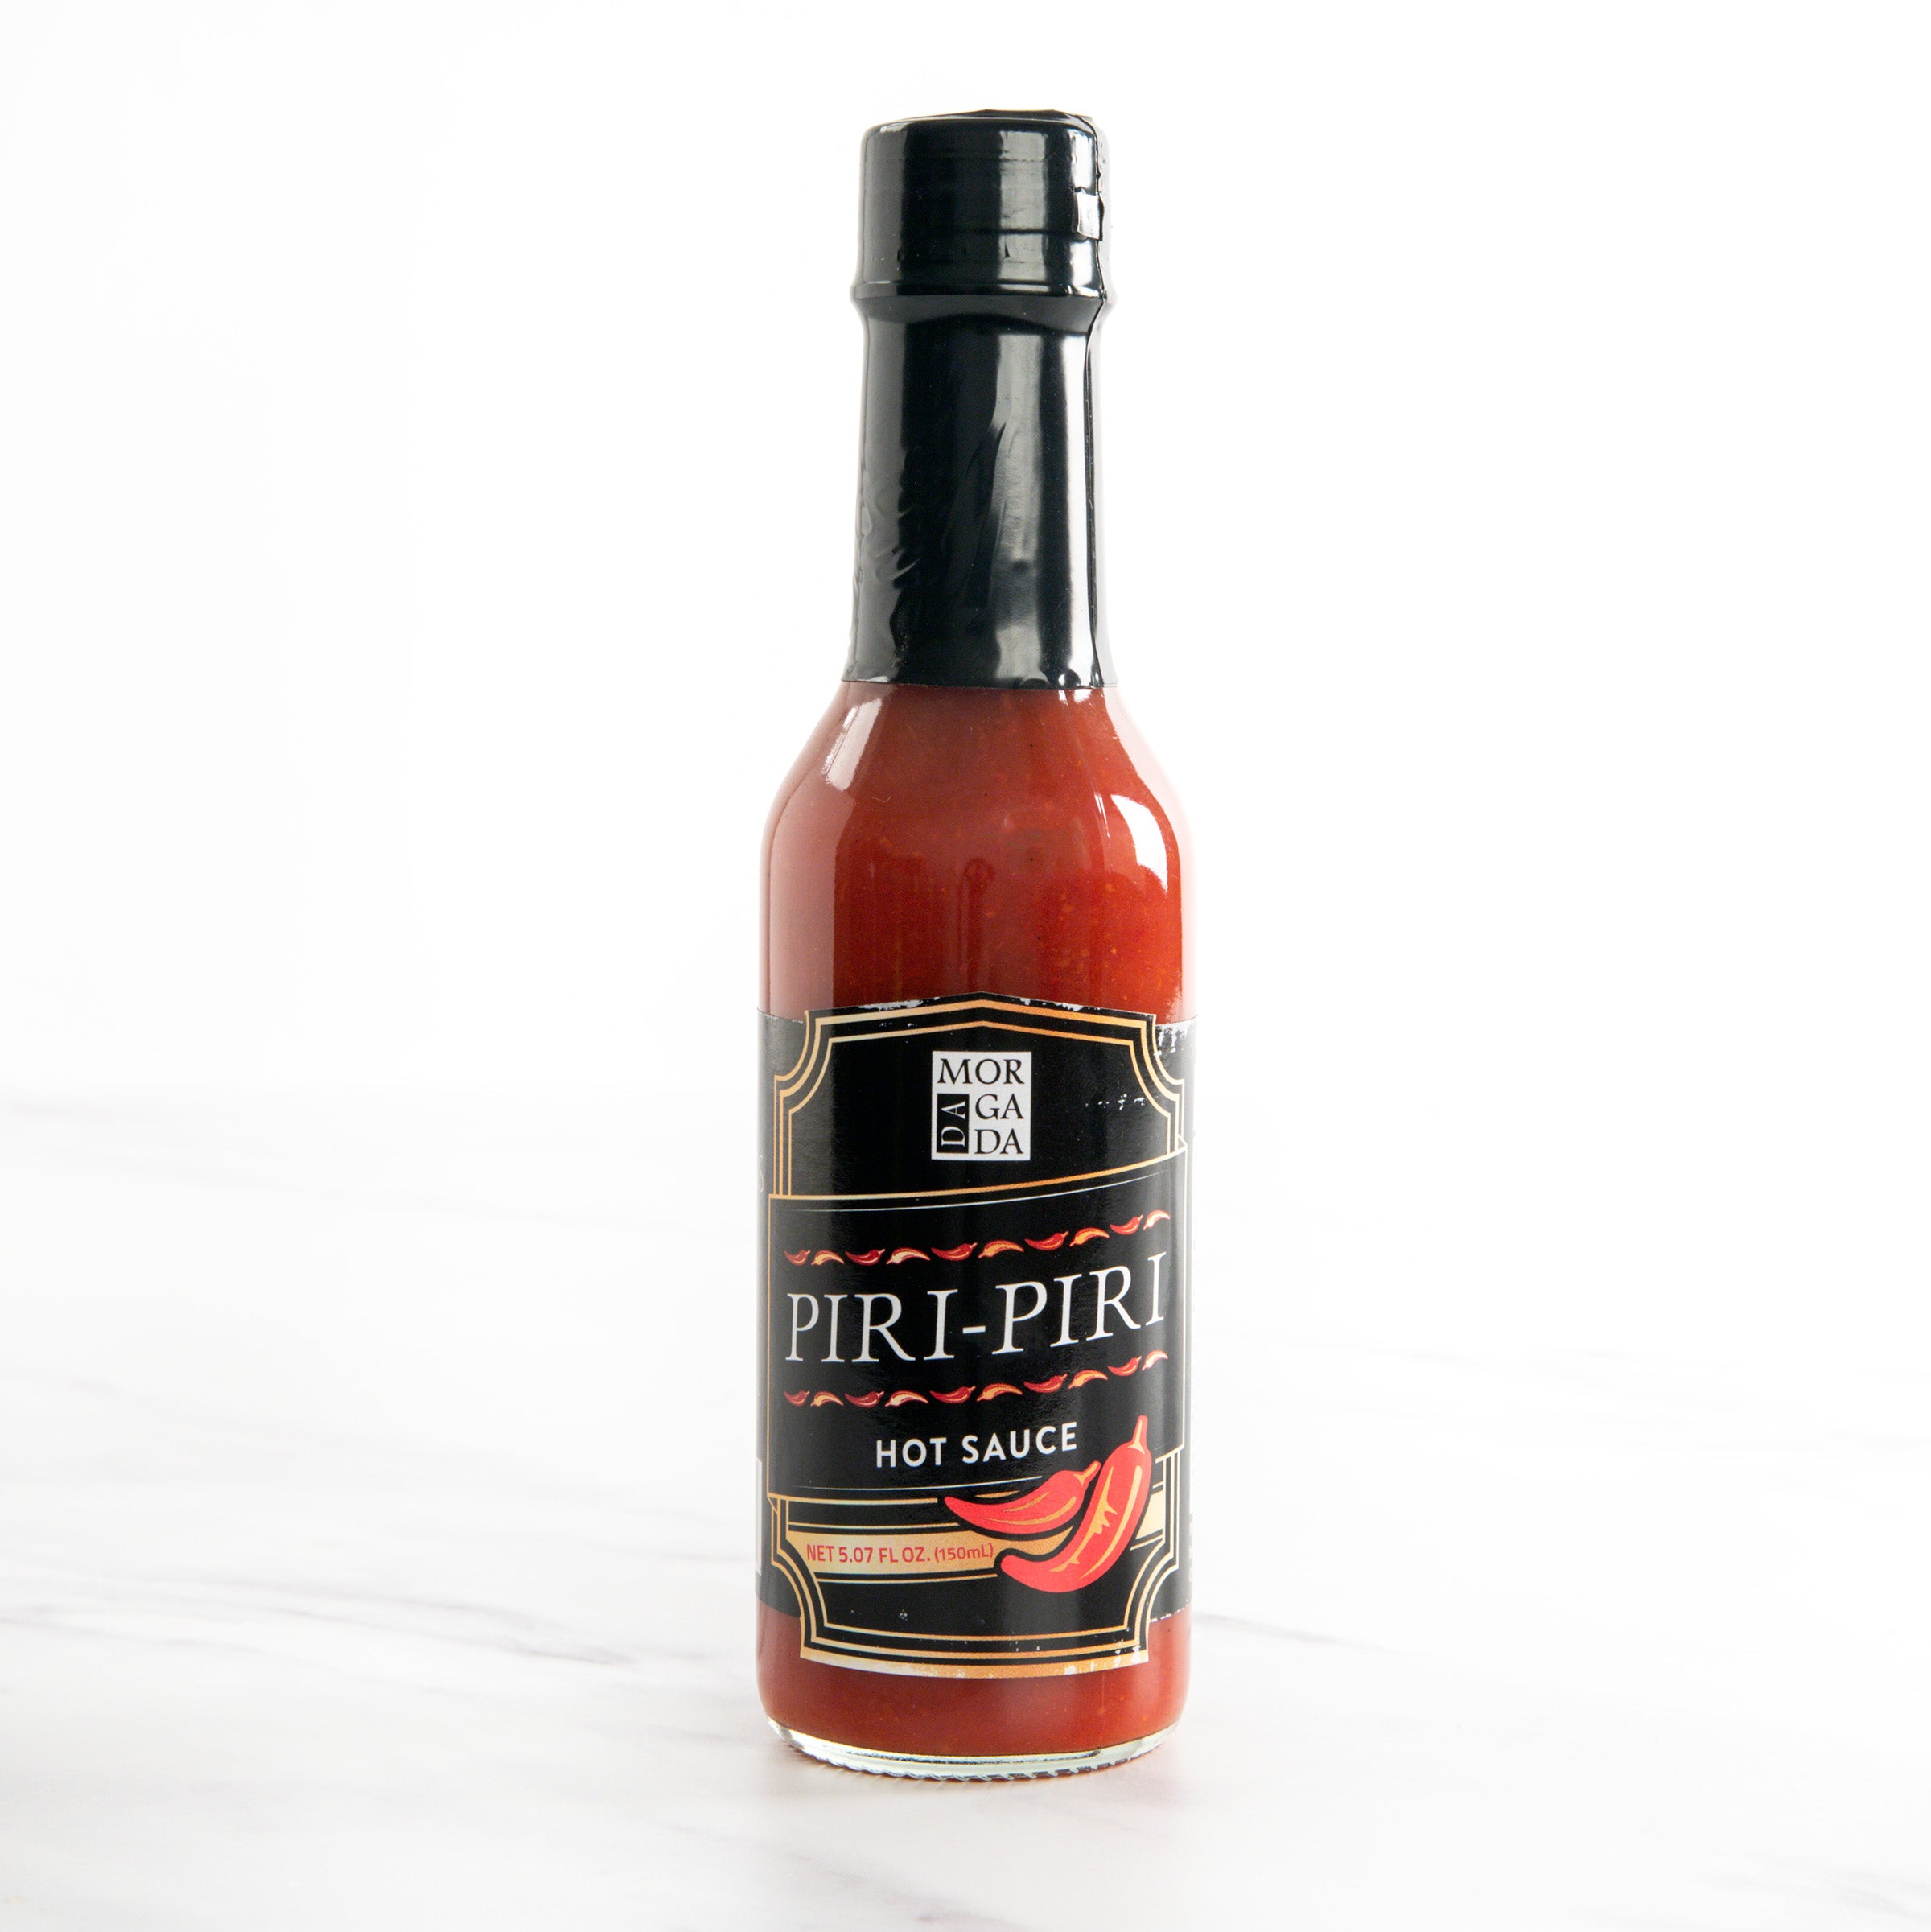 Red Rooster Hot Sauce, 6 fl oz - Food 4 Less